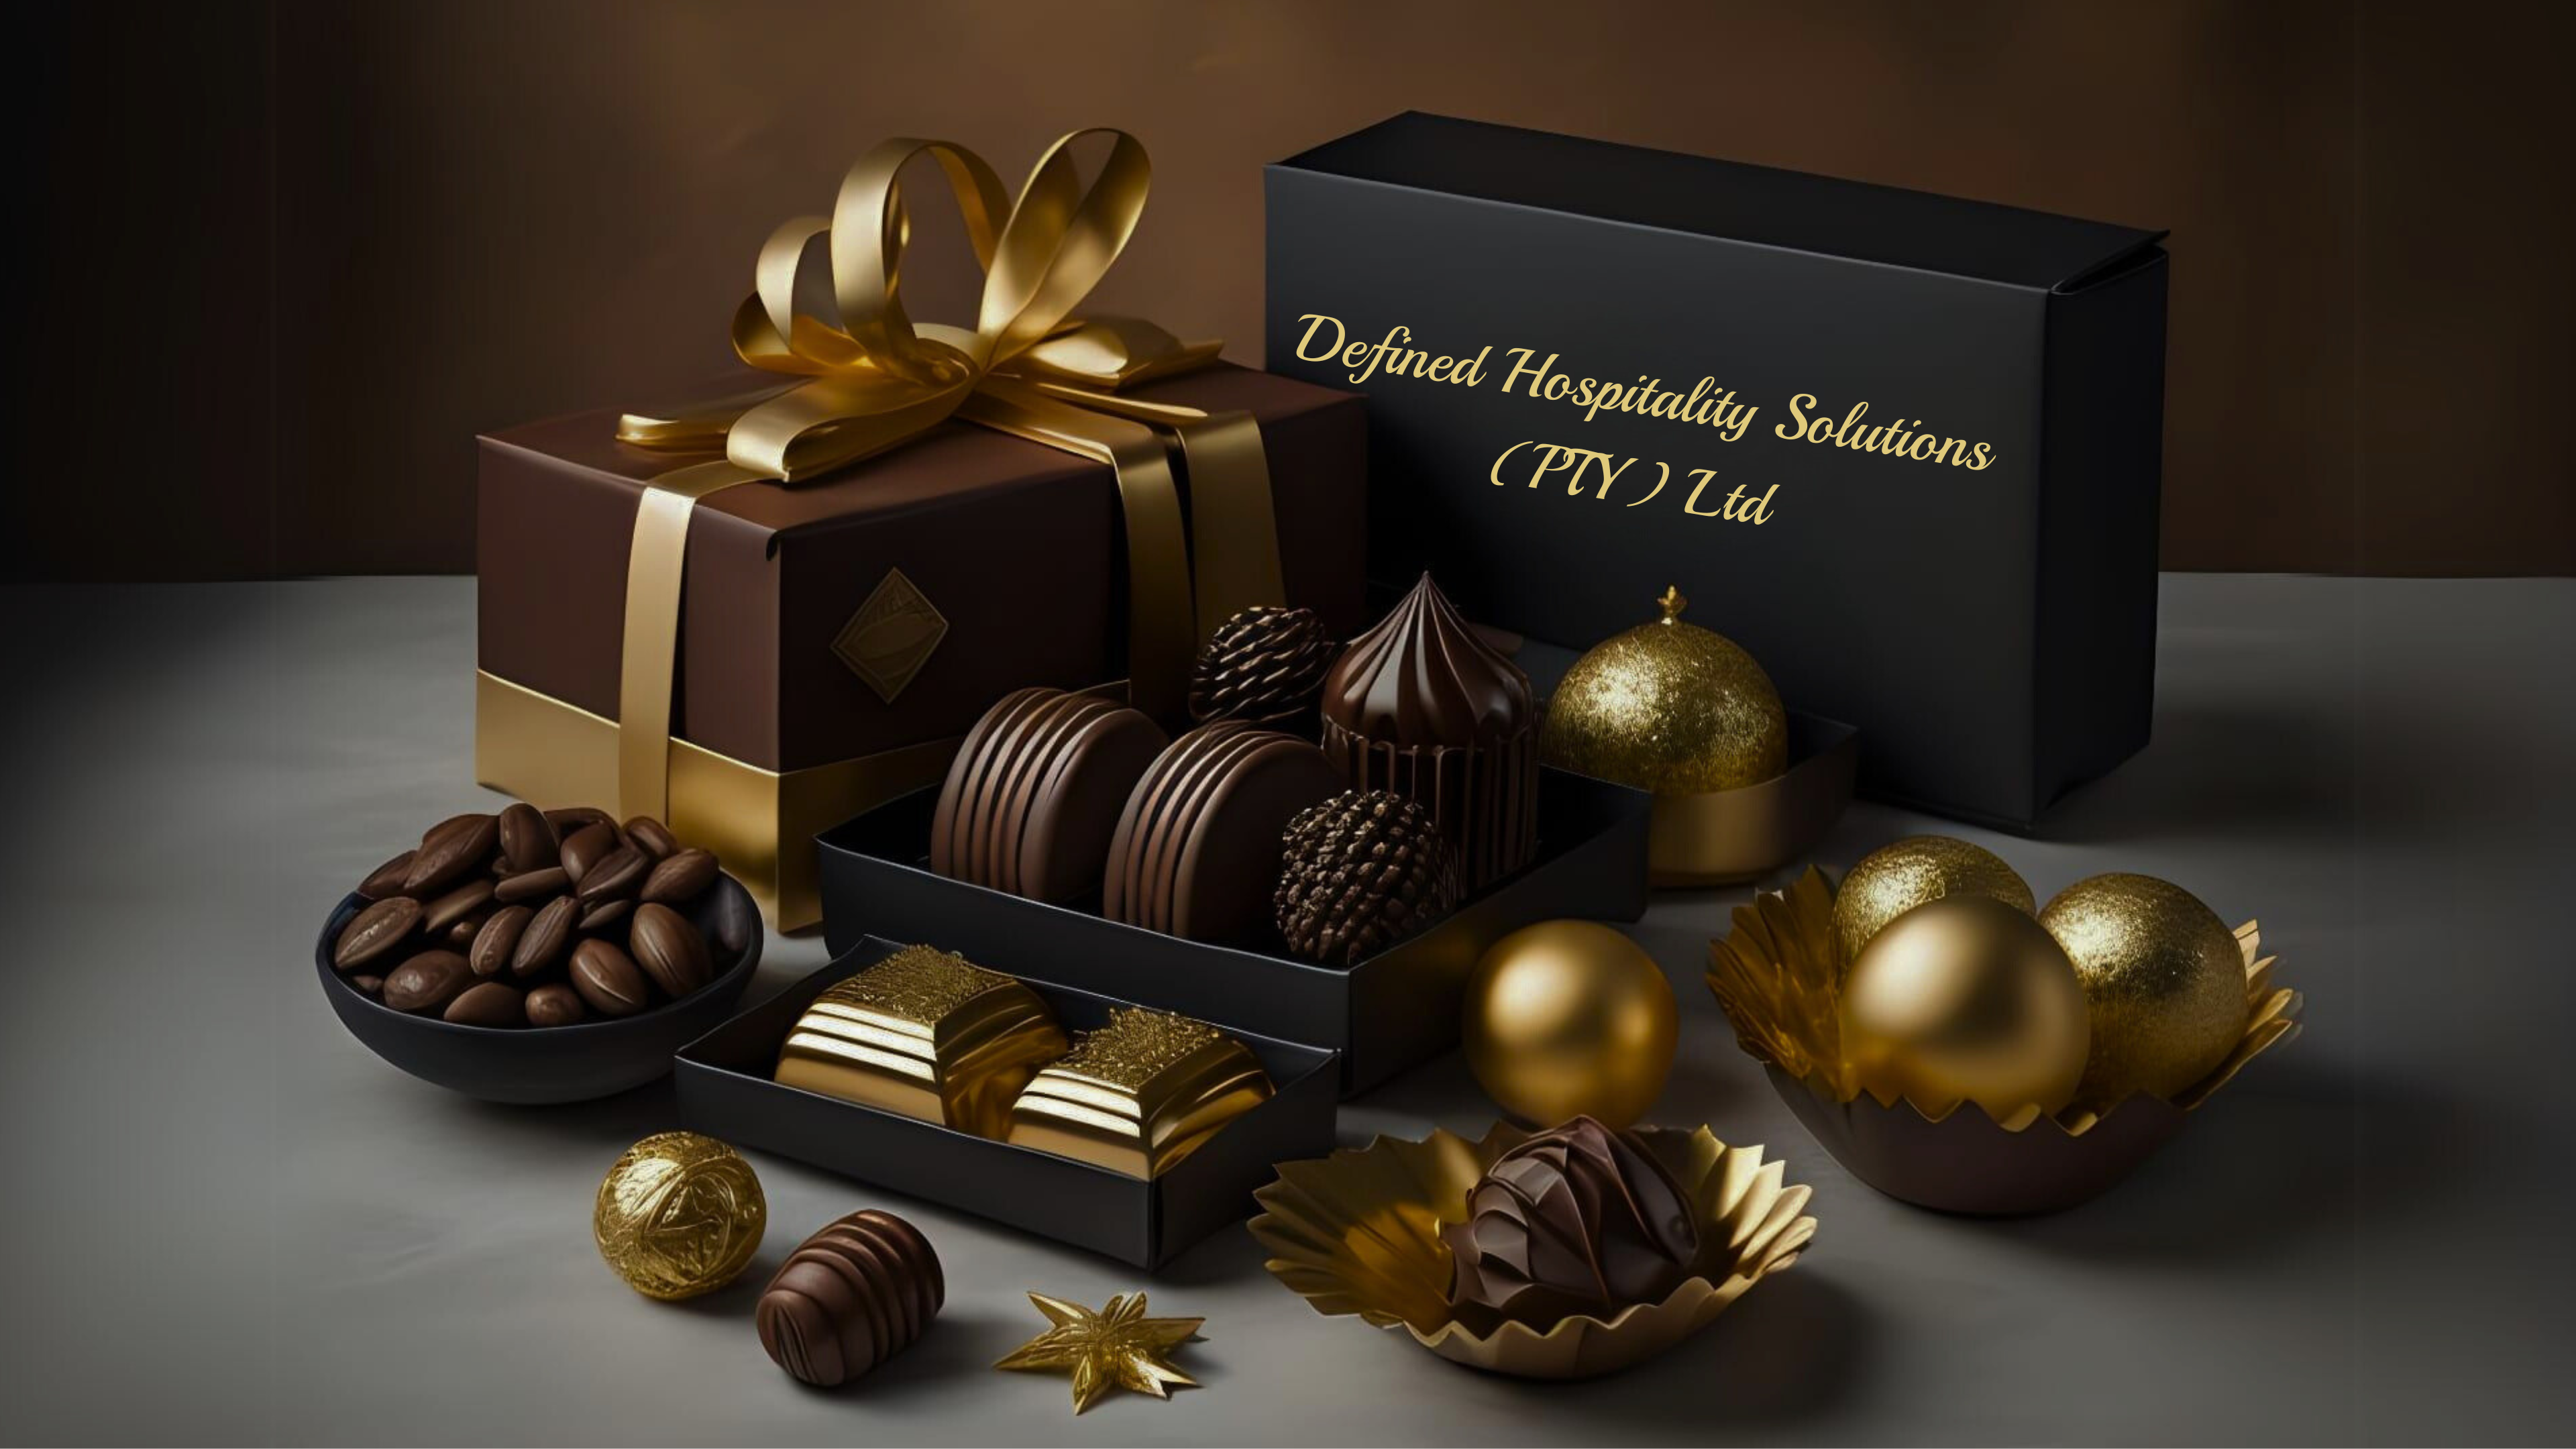 Defined Hospitality Solutions Front Banner Featuring A Variety Of Chocolates, Gifts with Golden Wrapping & Golden Ornaments